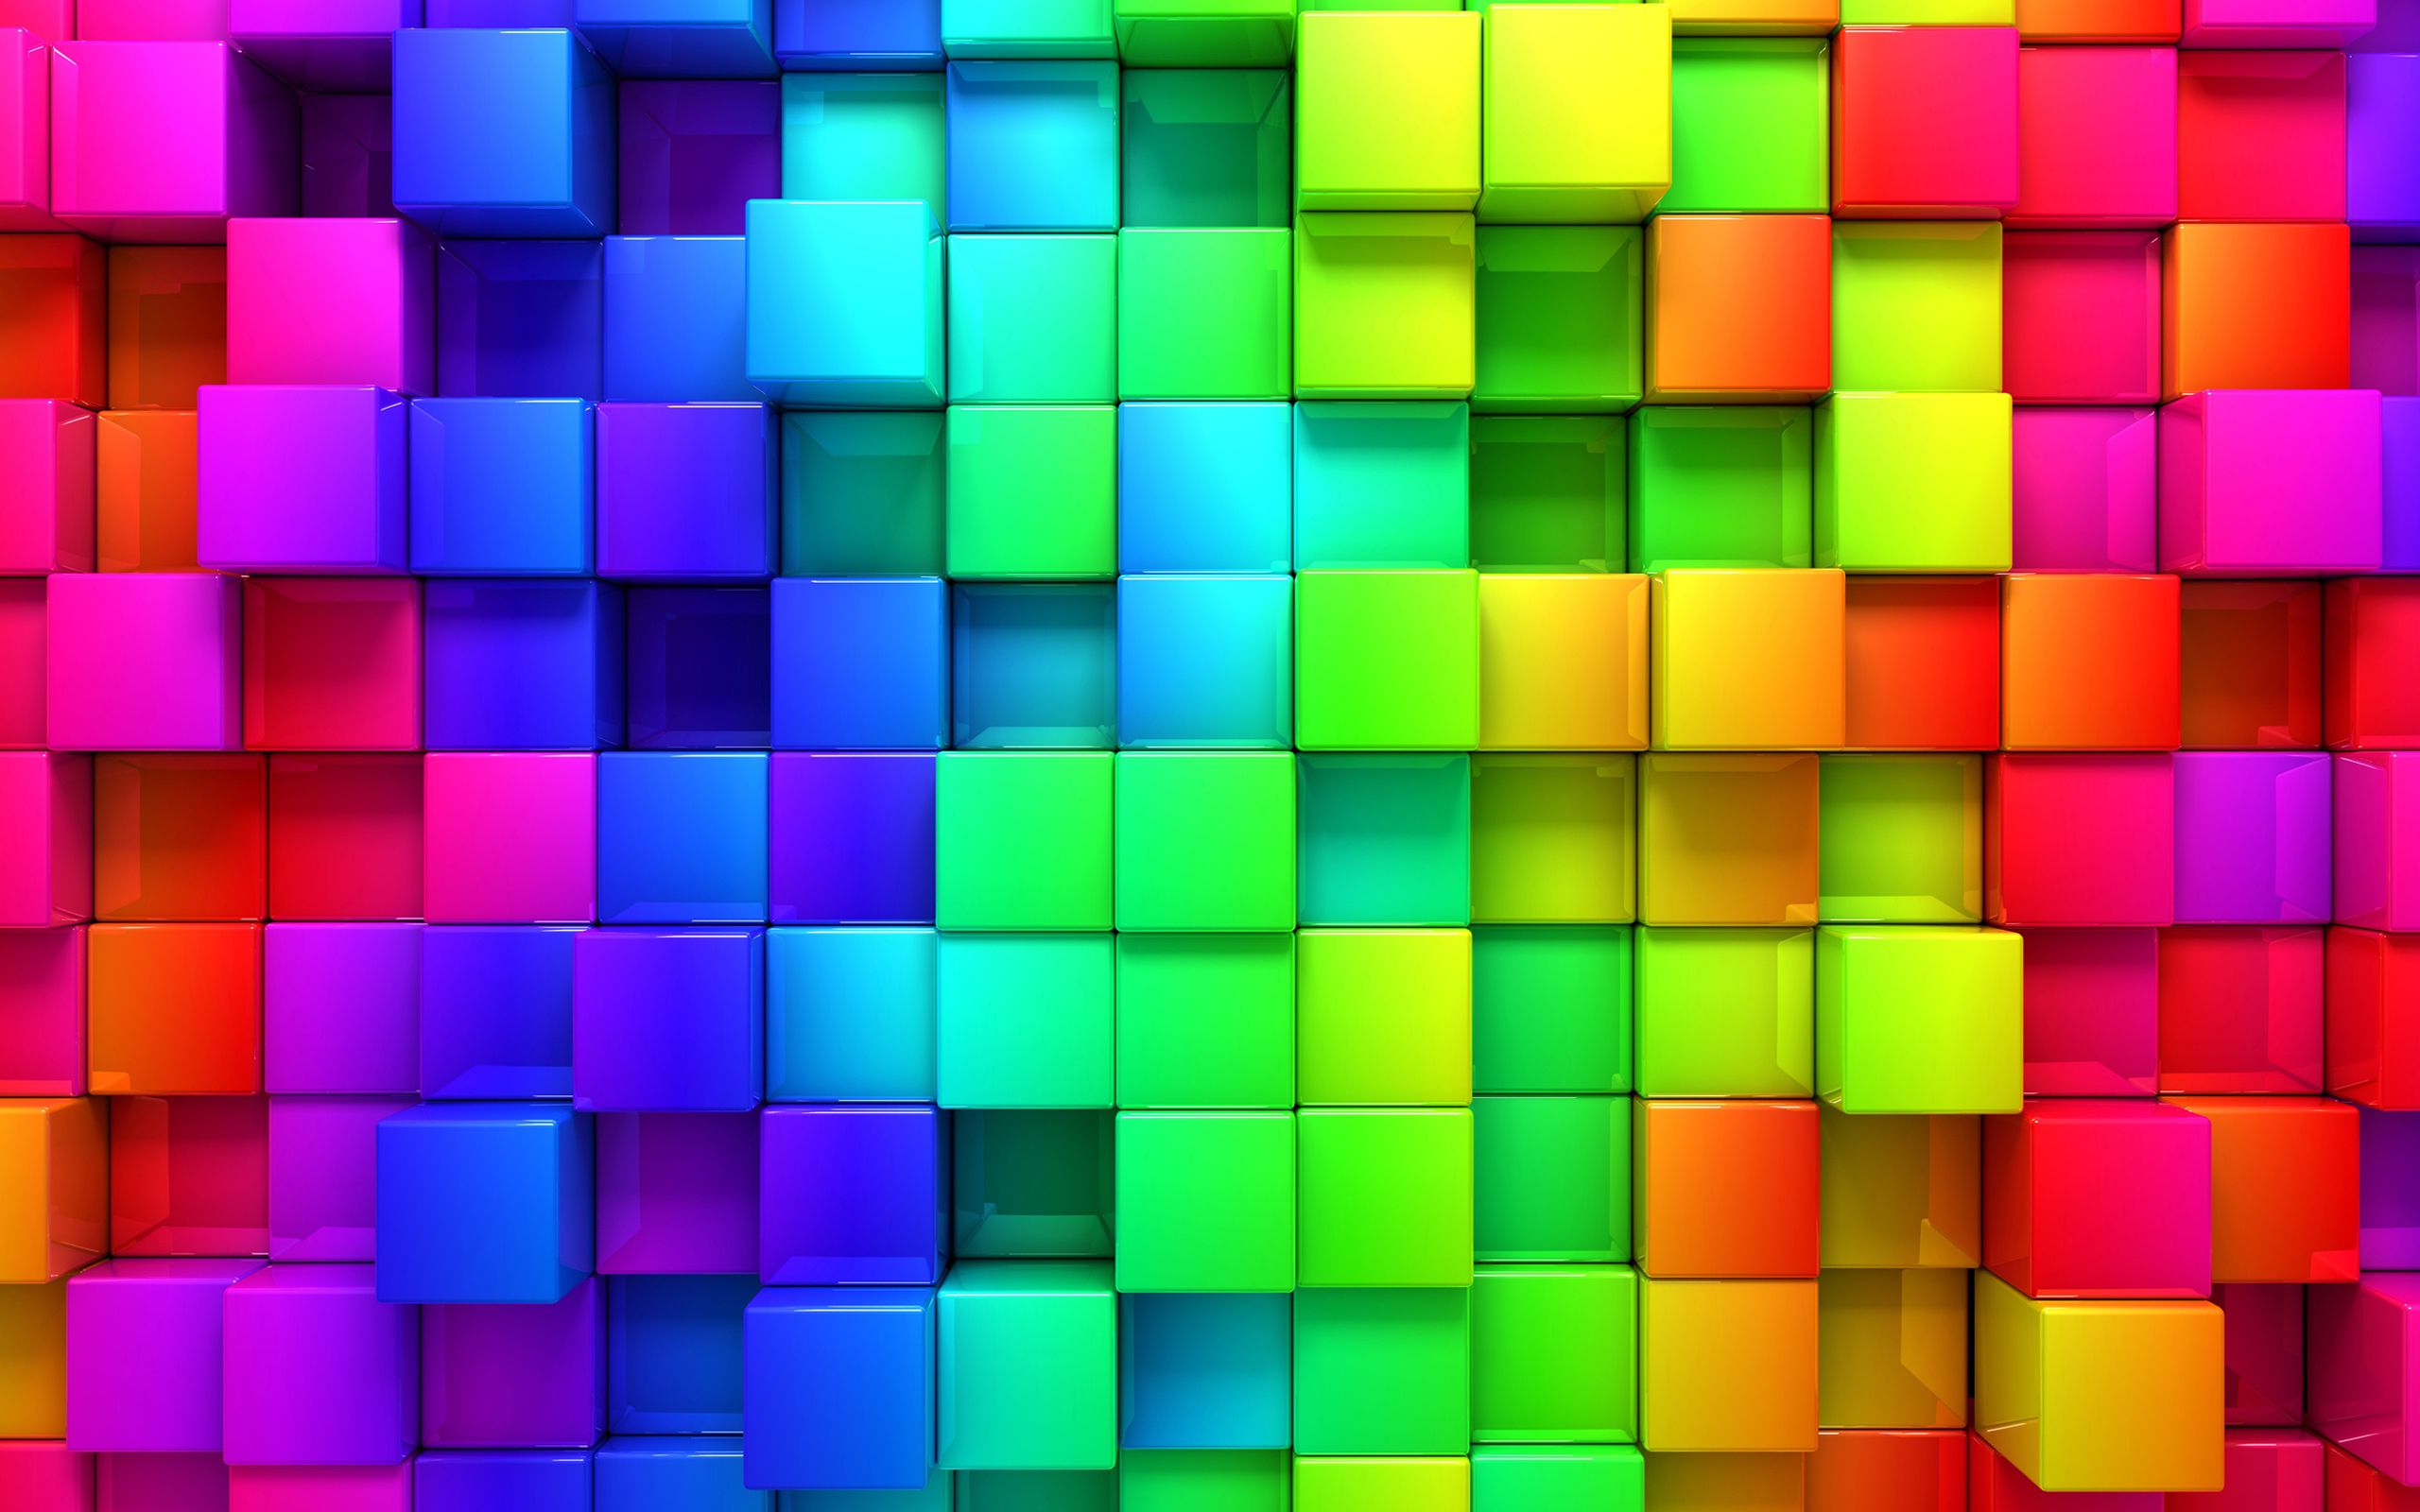 Samsung Galaxy Tab S wallpaper with Colorful 3D Cubes HD